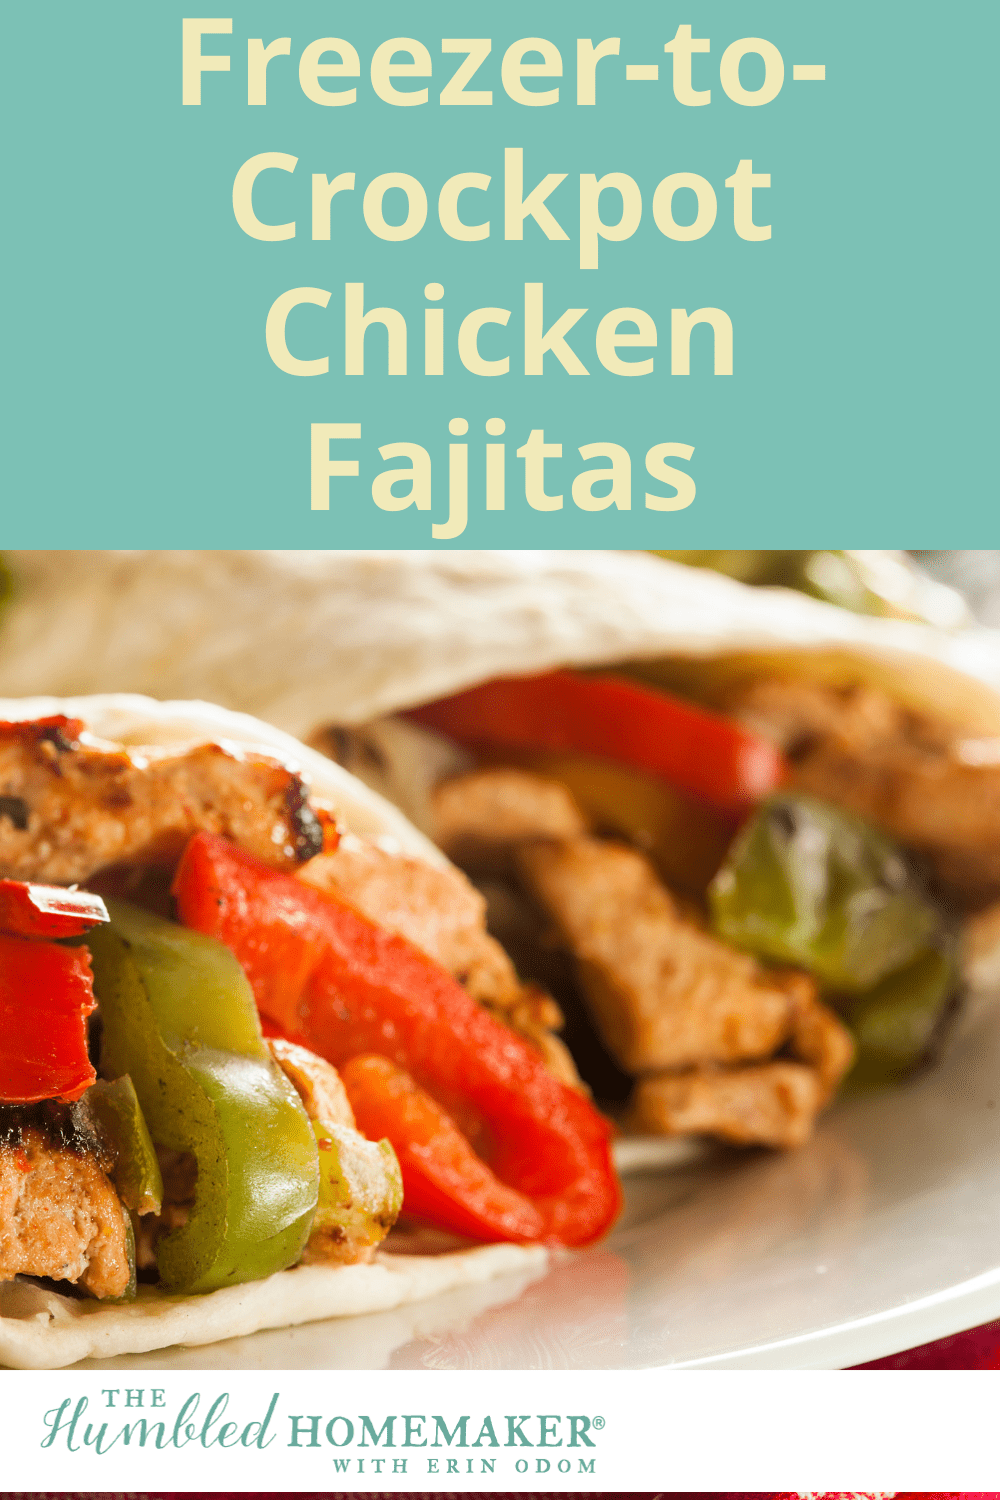 This recipe for freezer-to-crockpot chicken fajitas is very healthy! The chicken, peppers, and onions are all fresh and you create your own simple sauce.